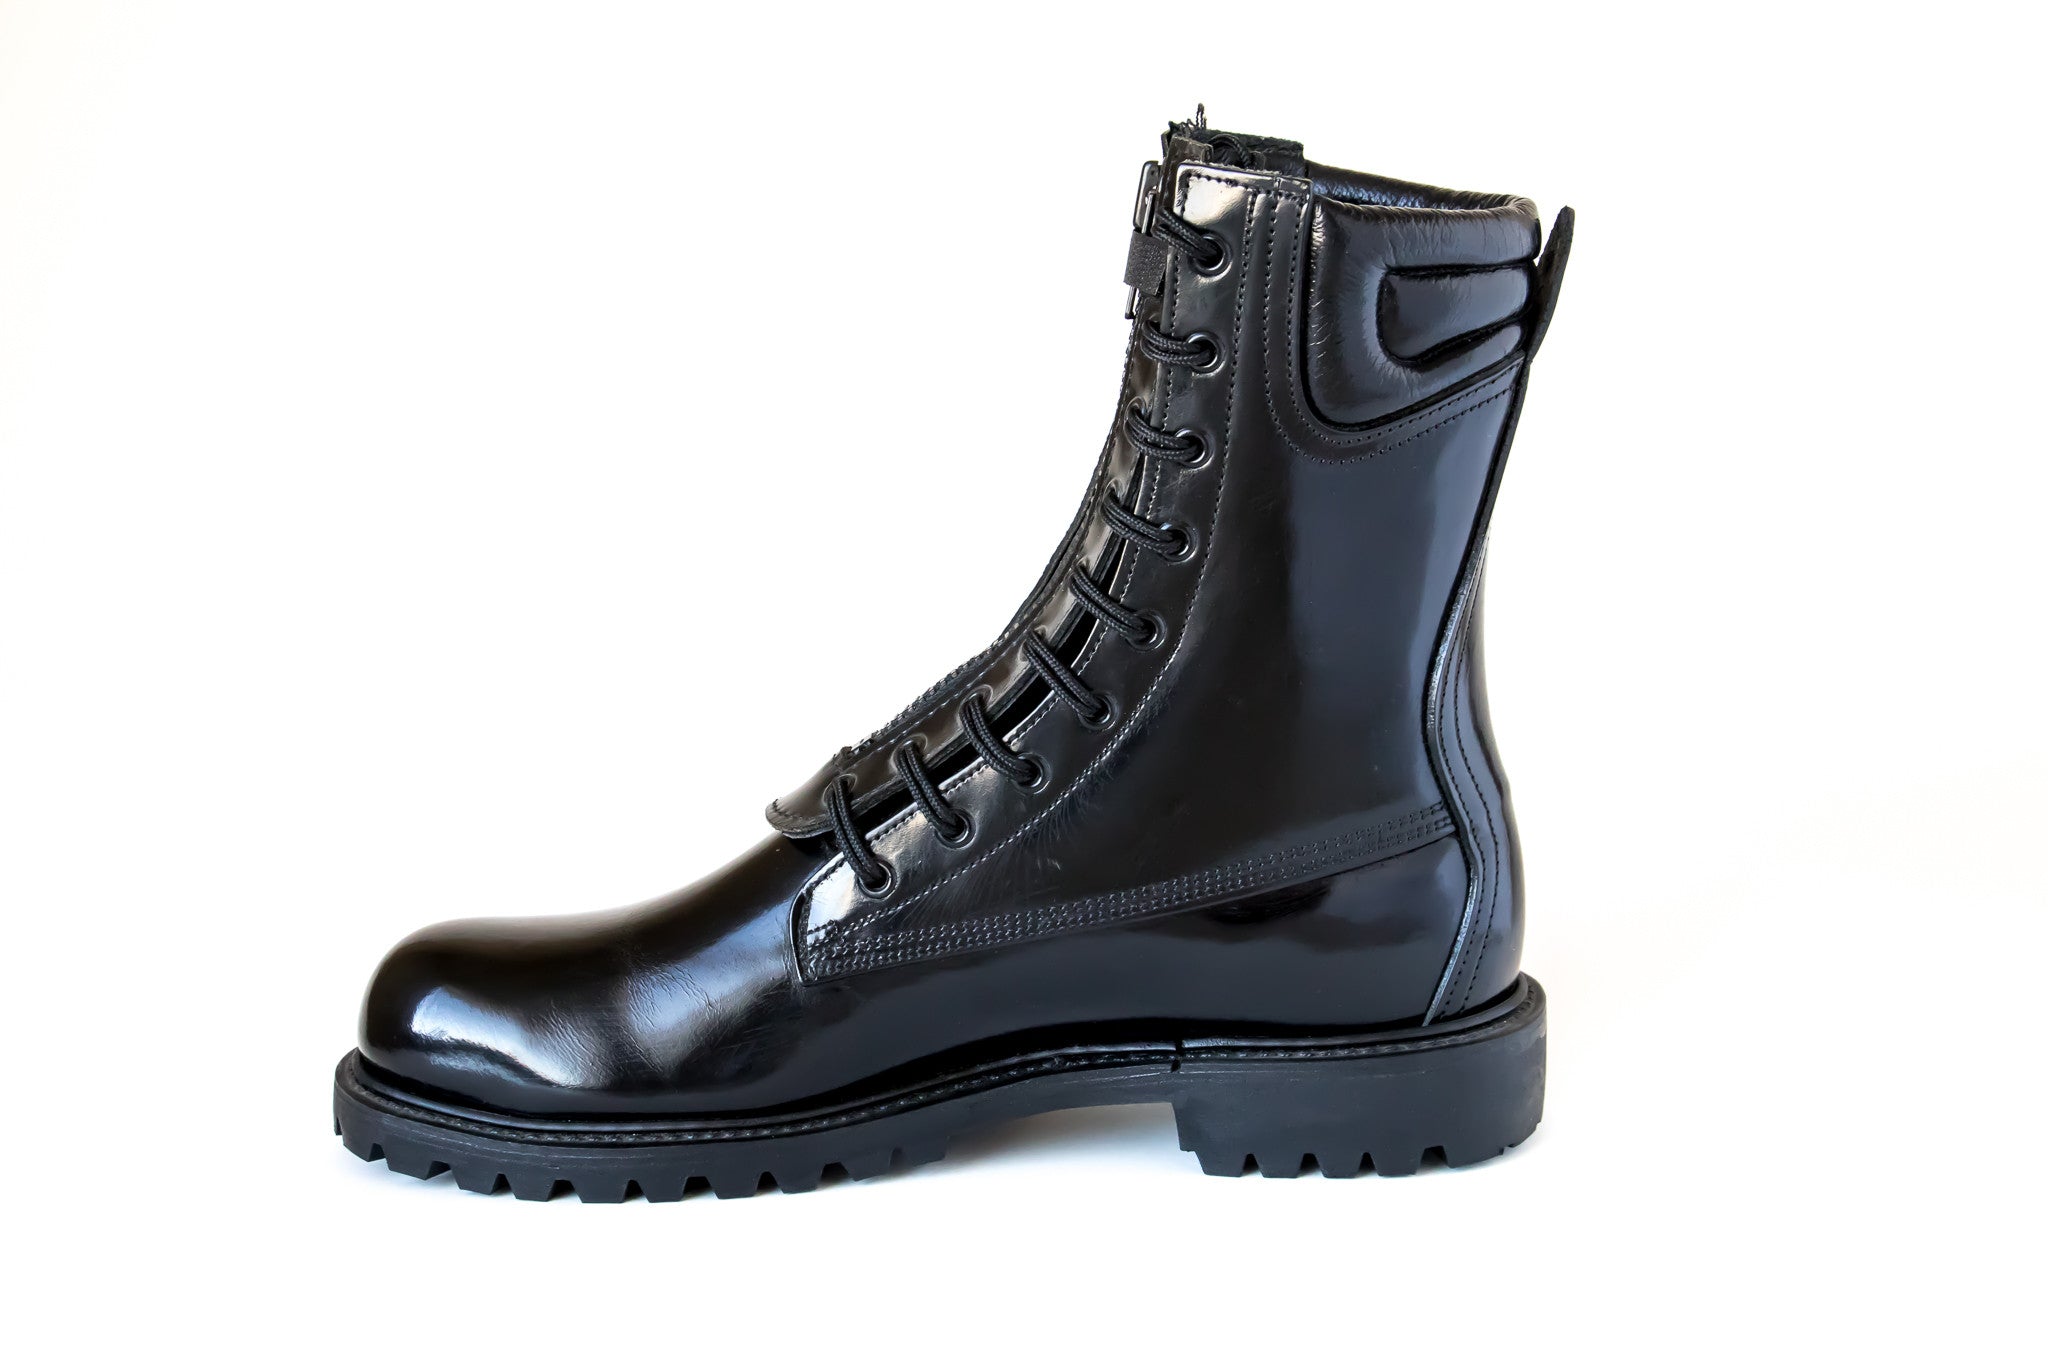 FFB 100 - 8" Structural Firefighter Station/Duty Boots